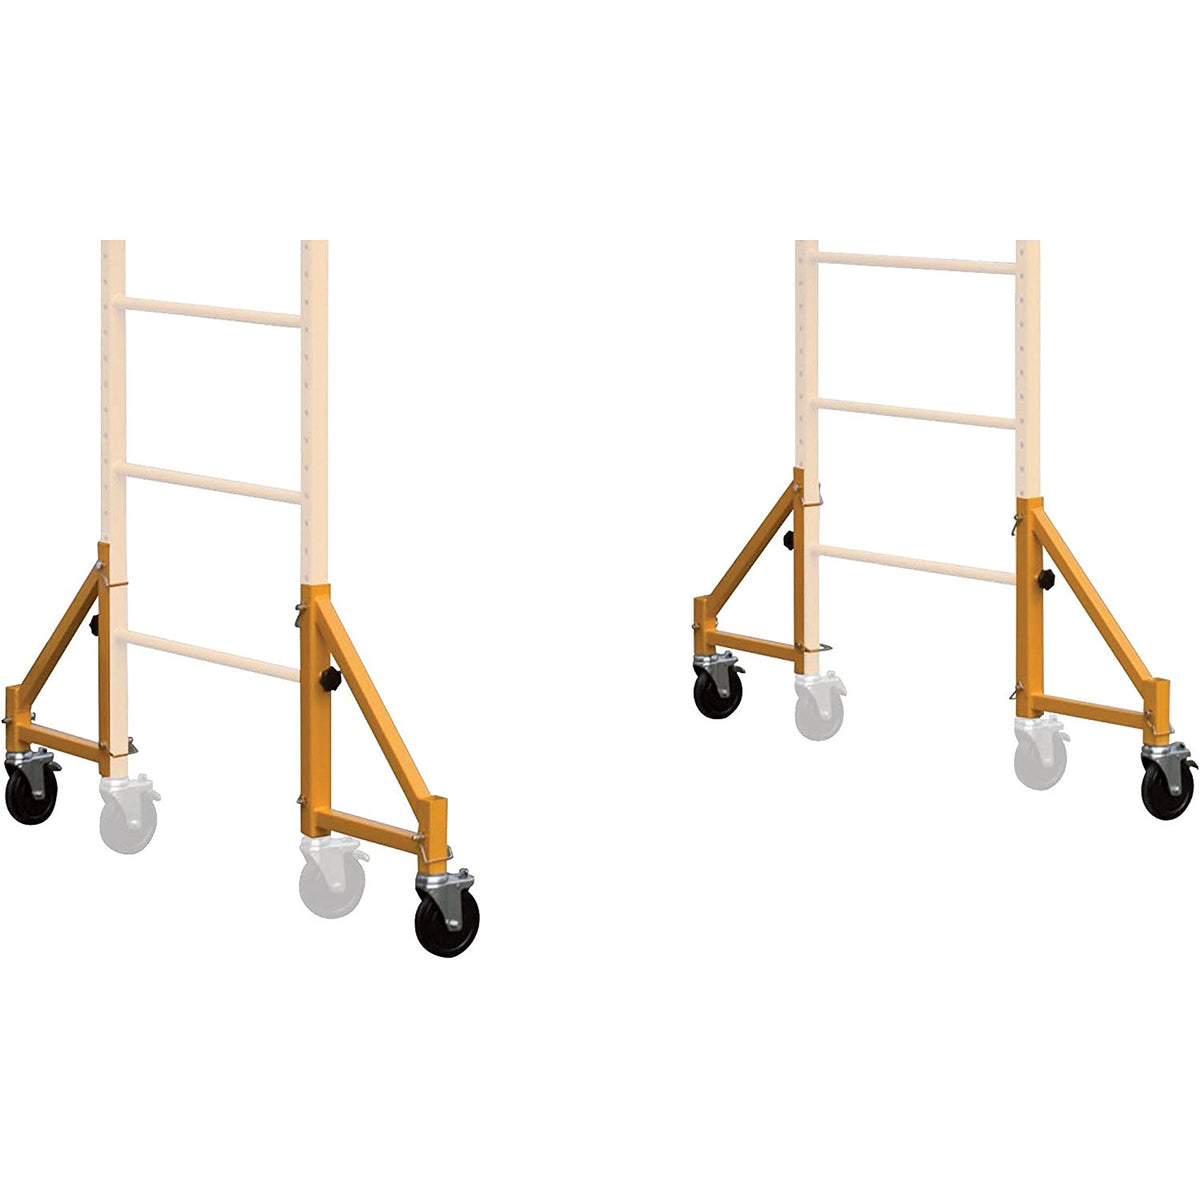 4 Outriggers with Locking Pins for 6' or 12' scaffold OSHA Approved